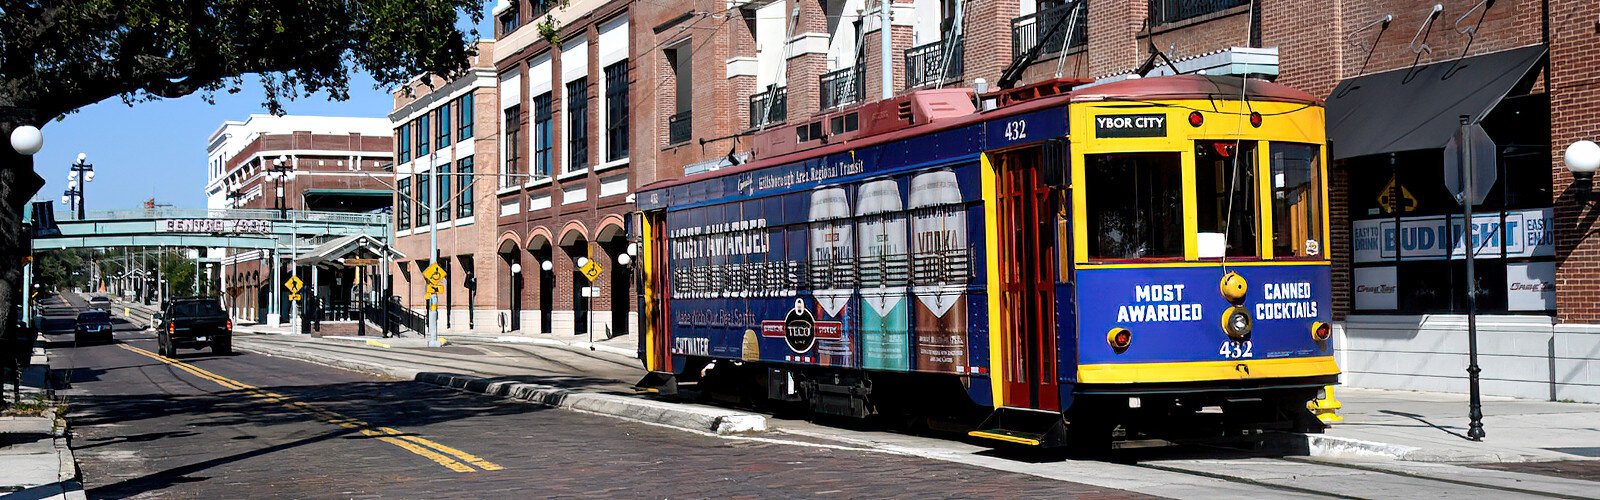 The TECO Line Streetcar offers year-round, fare-free transportation between Ybor city and downtown Tampa.